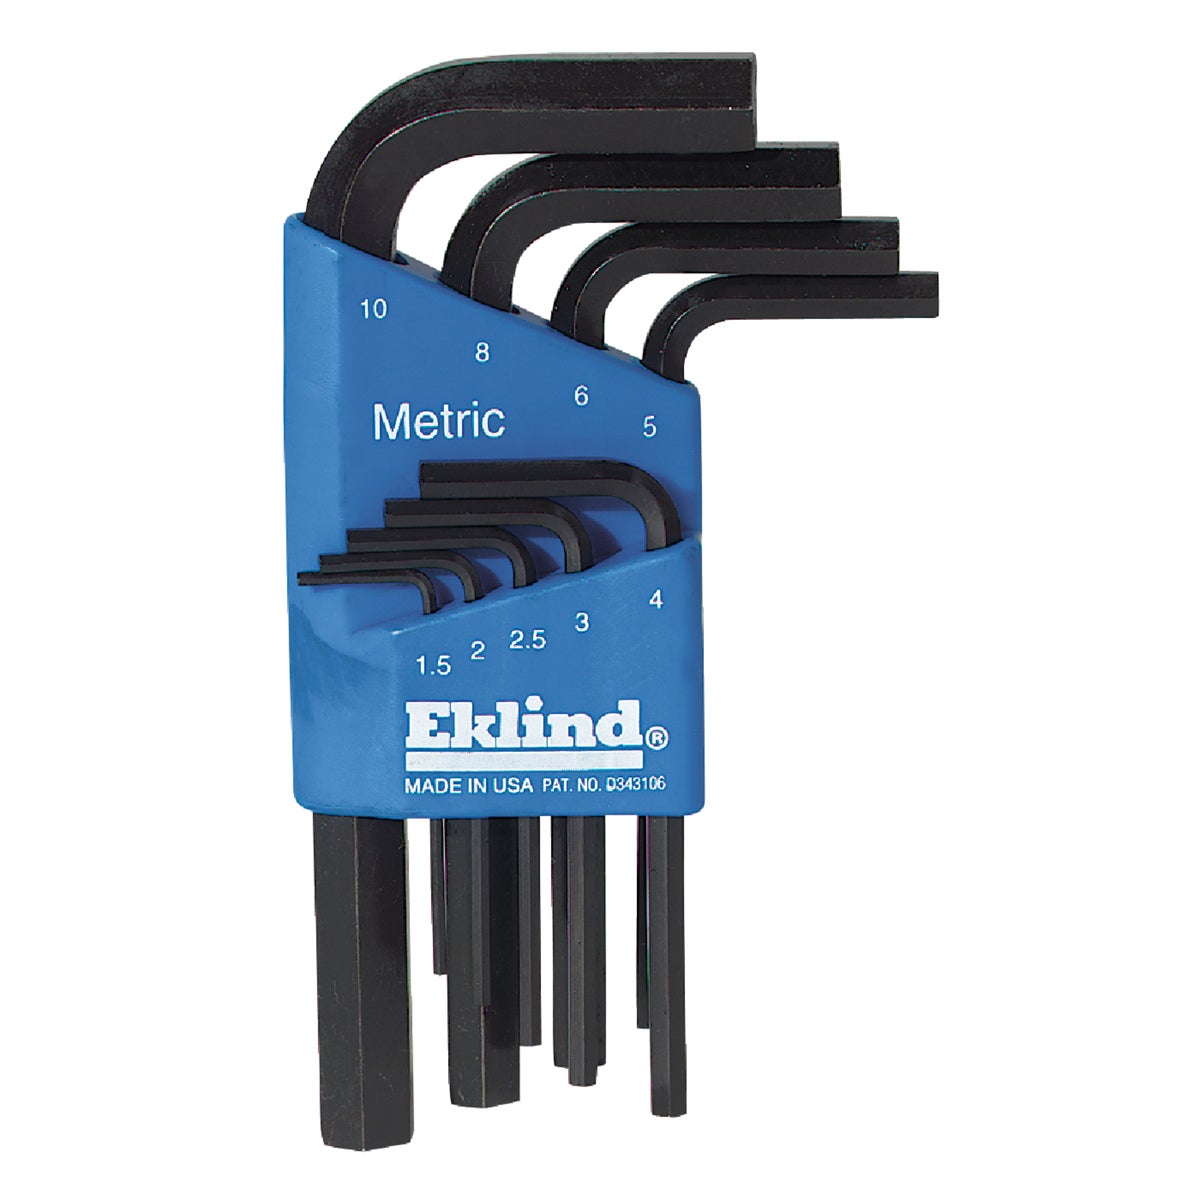 Item 348791, Includes hex key wrenches in sizes: 1.5mm, 2mm, 2.